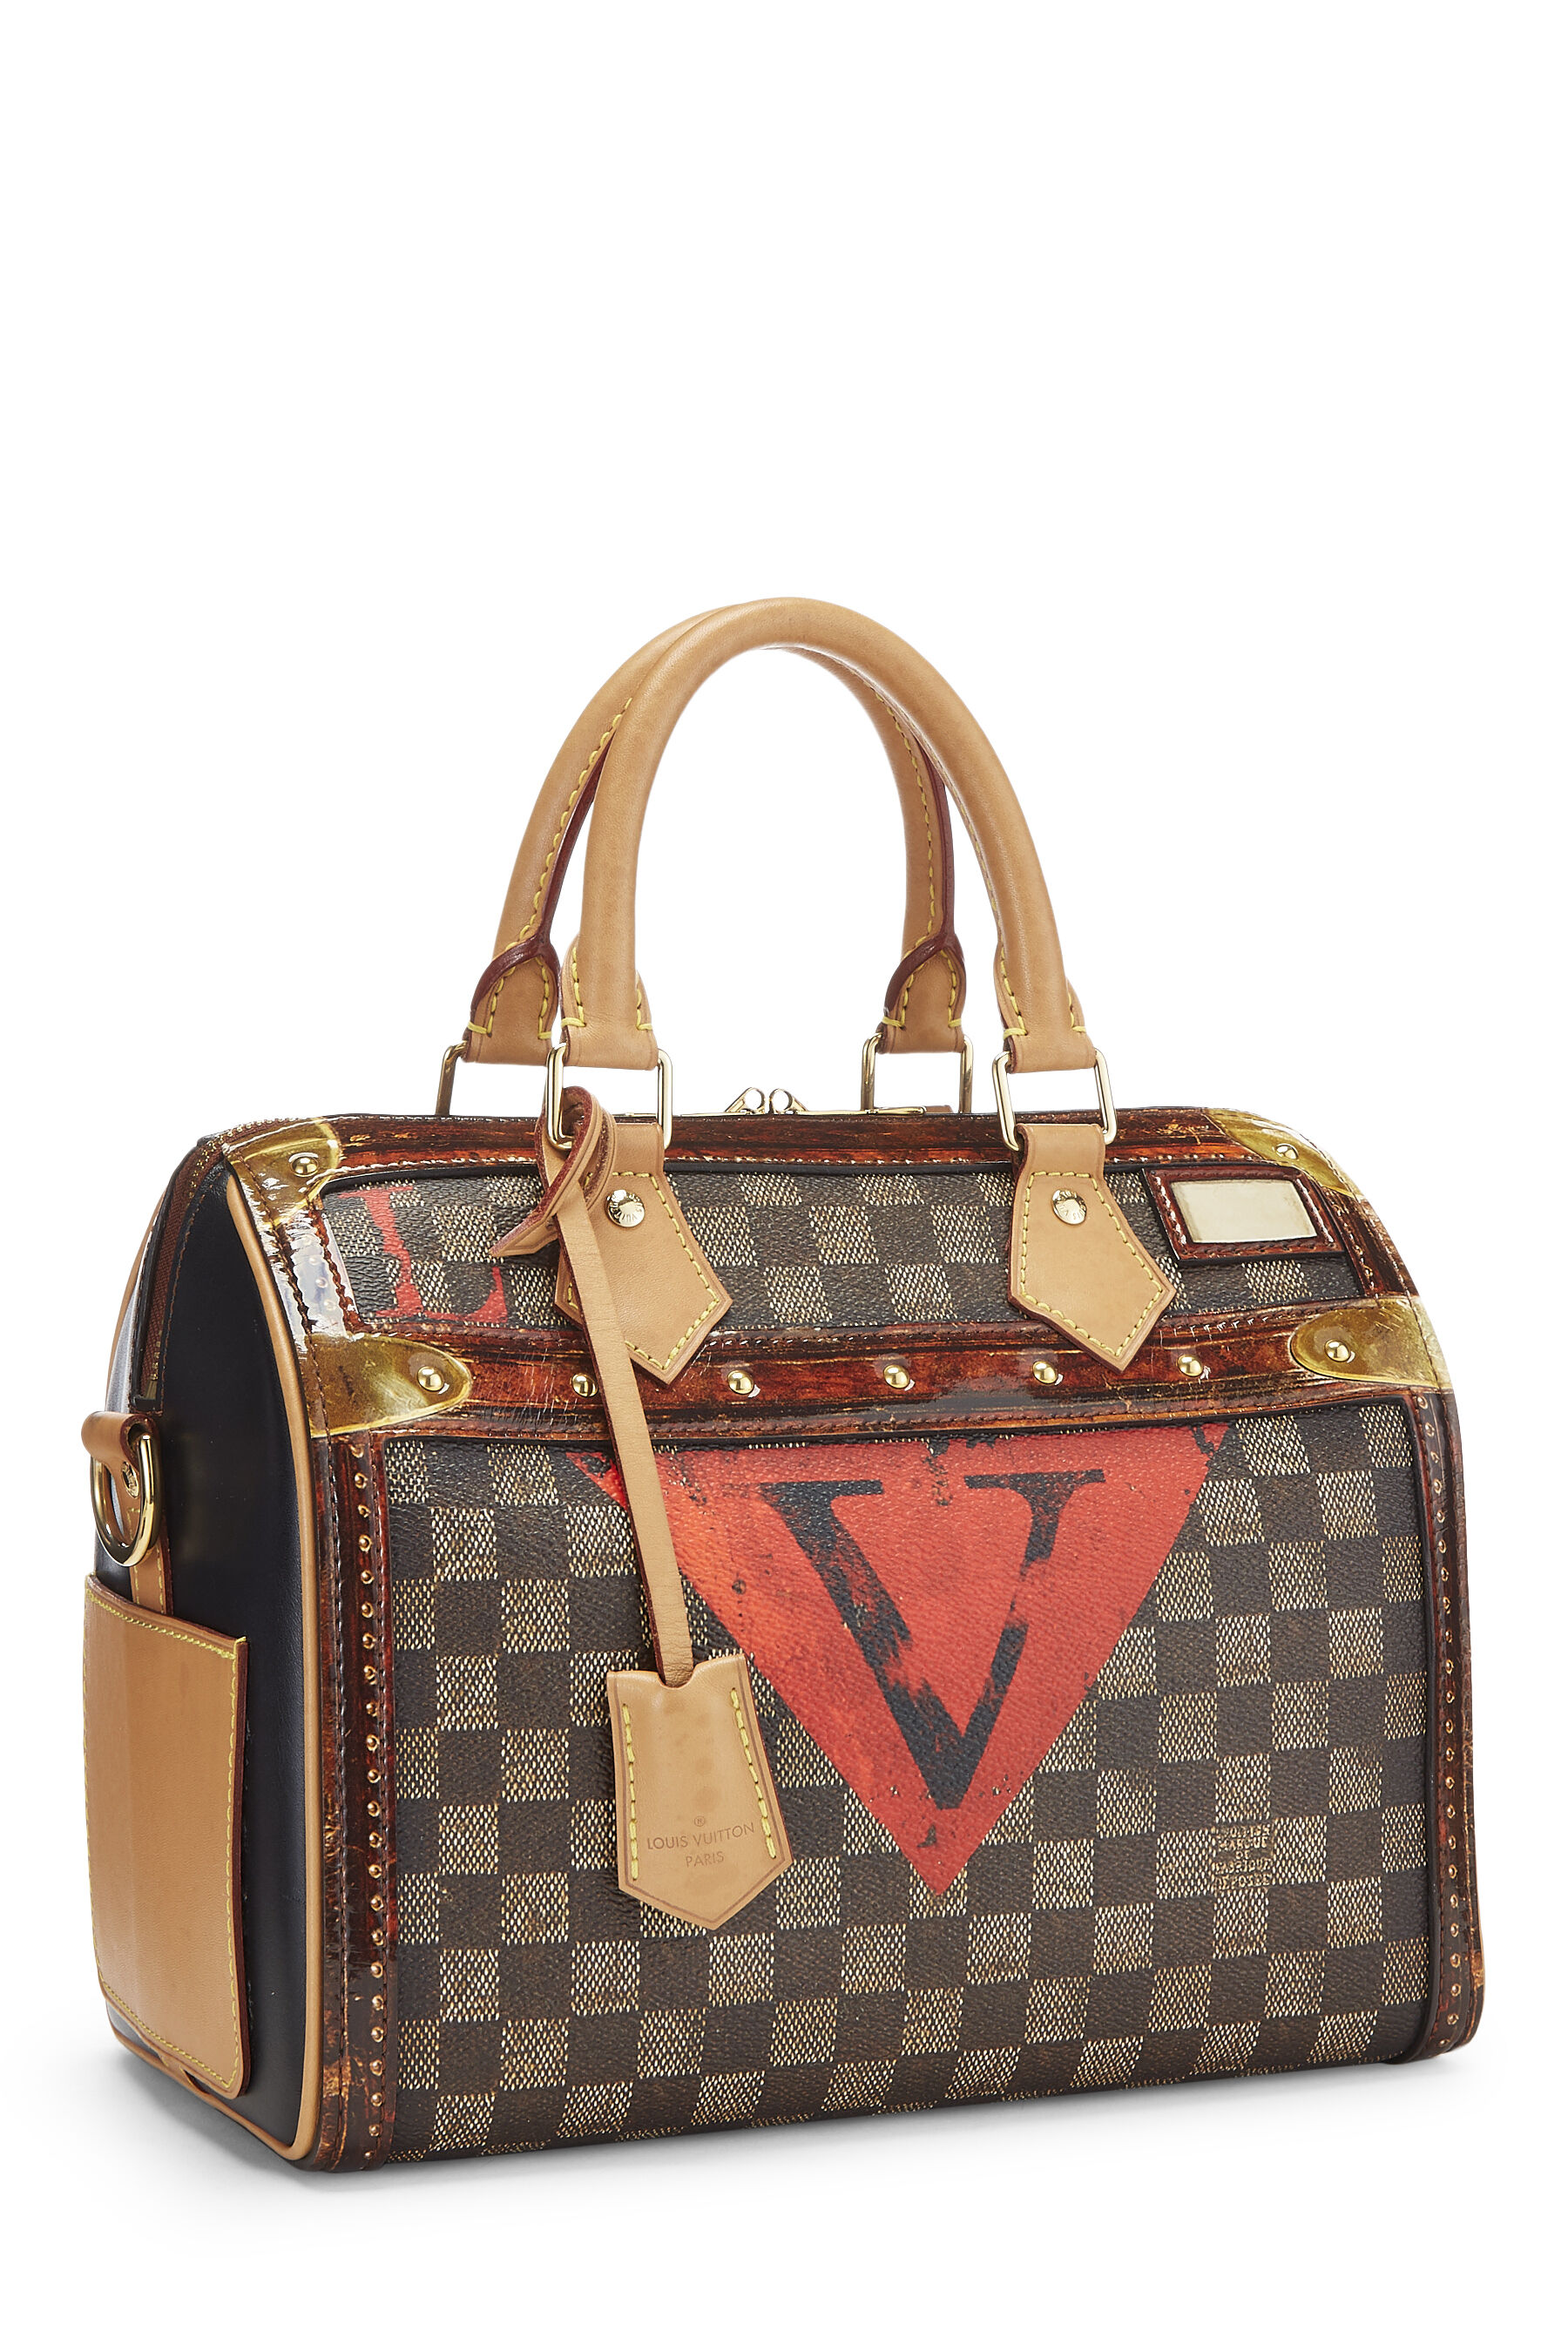 LOUIS VUITTON LIMITED EDITION TIME TRUNKS SPEEDY 25 BANDOLIERE